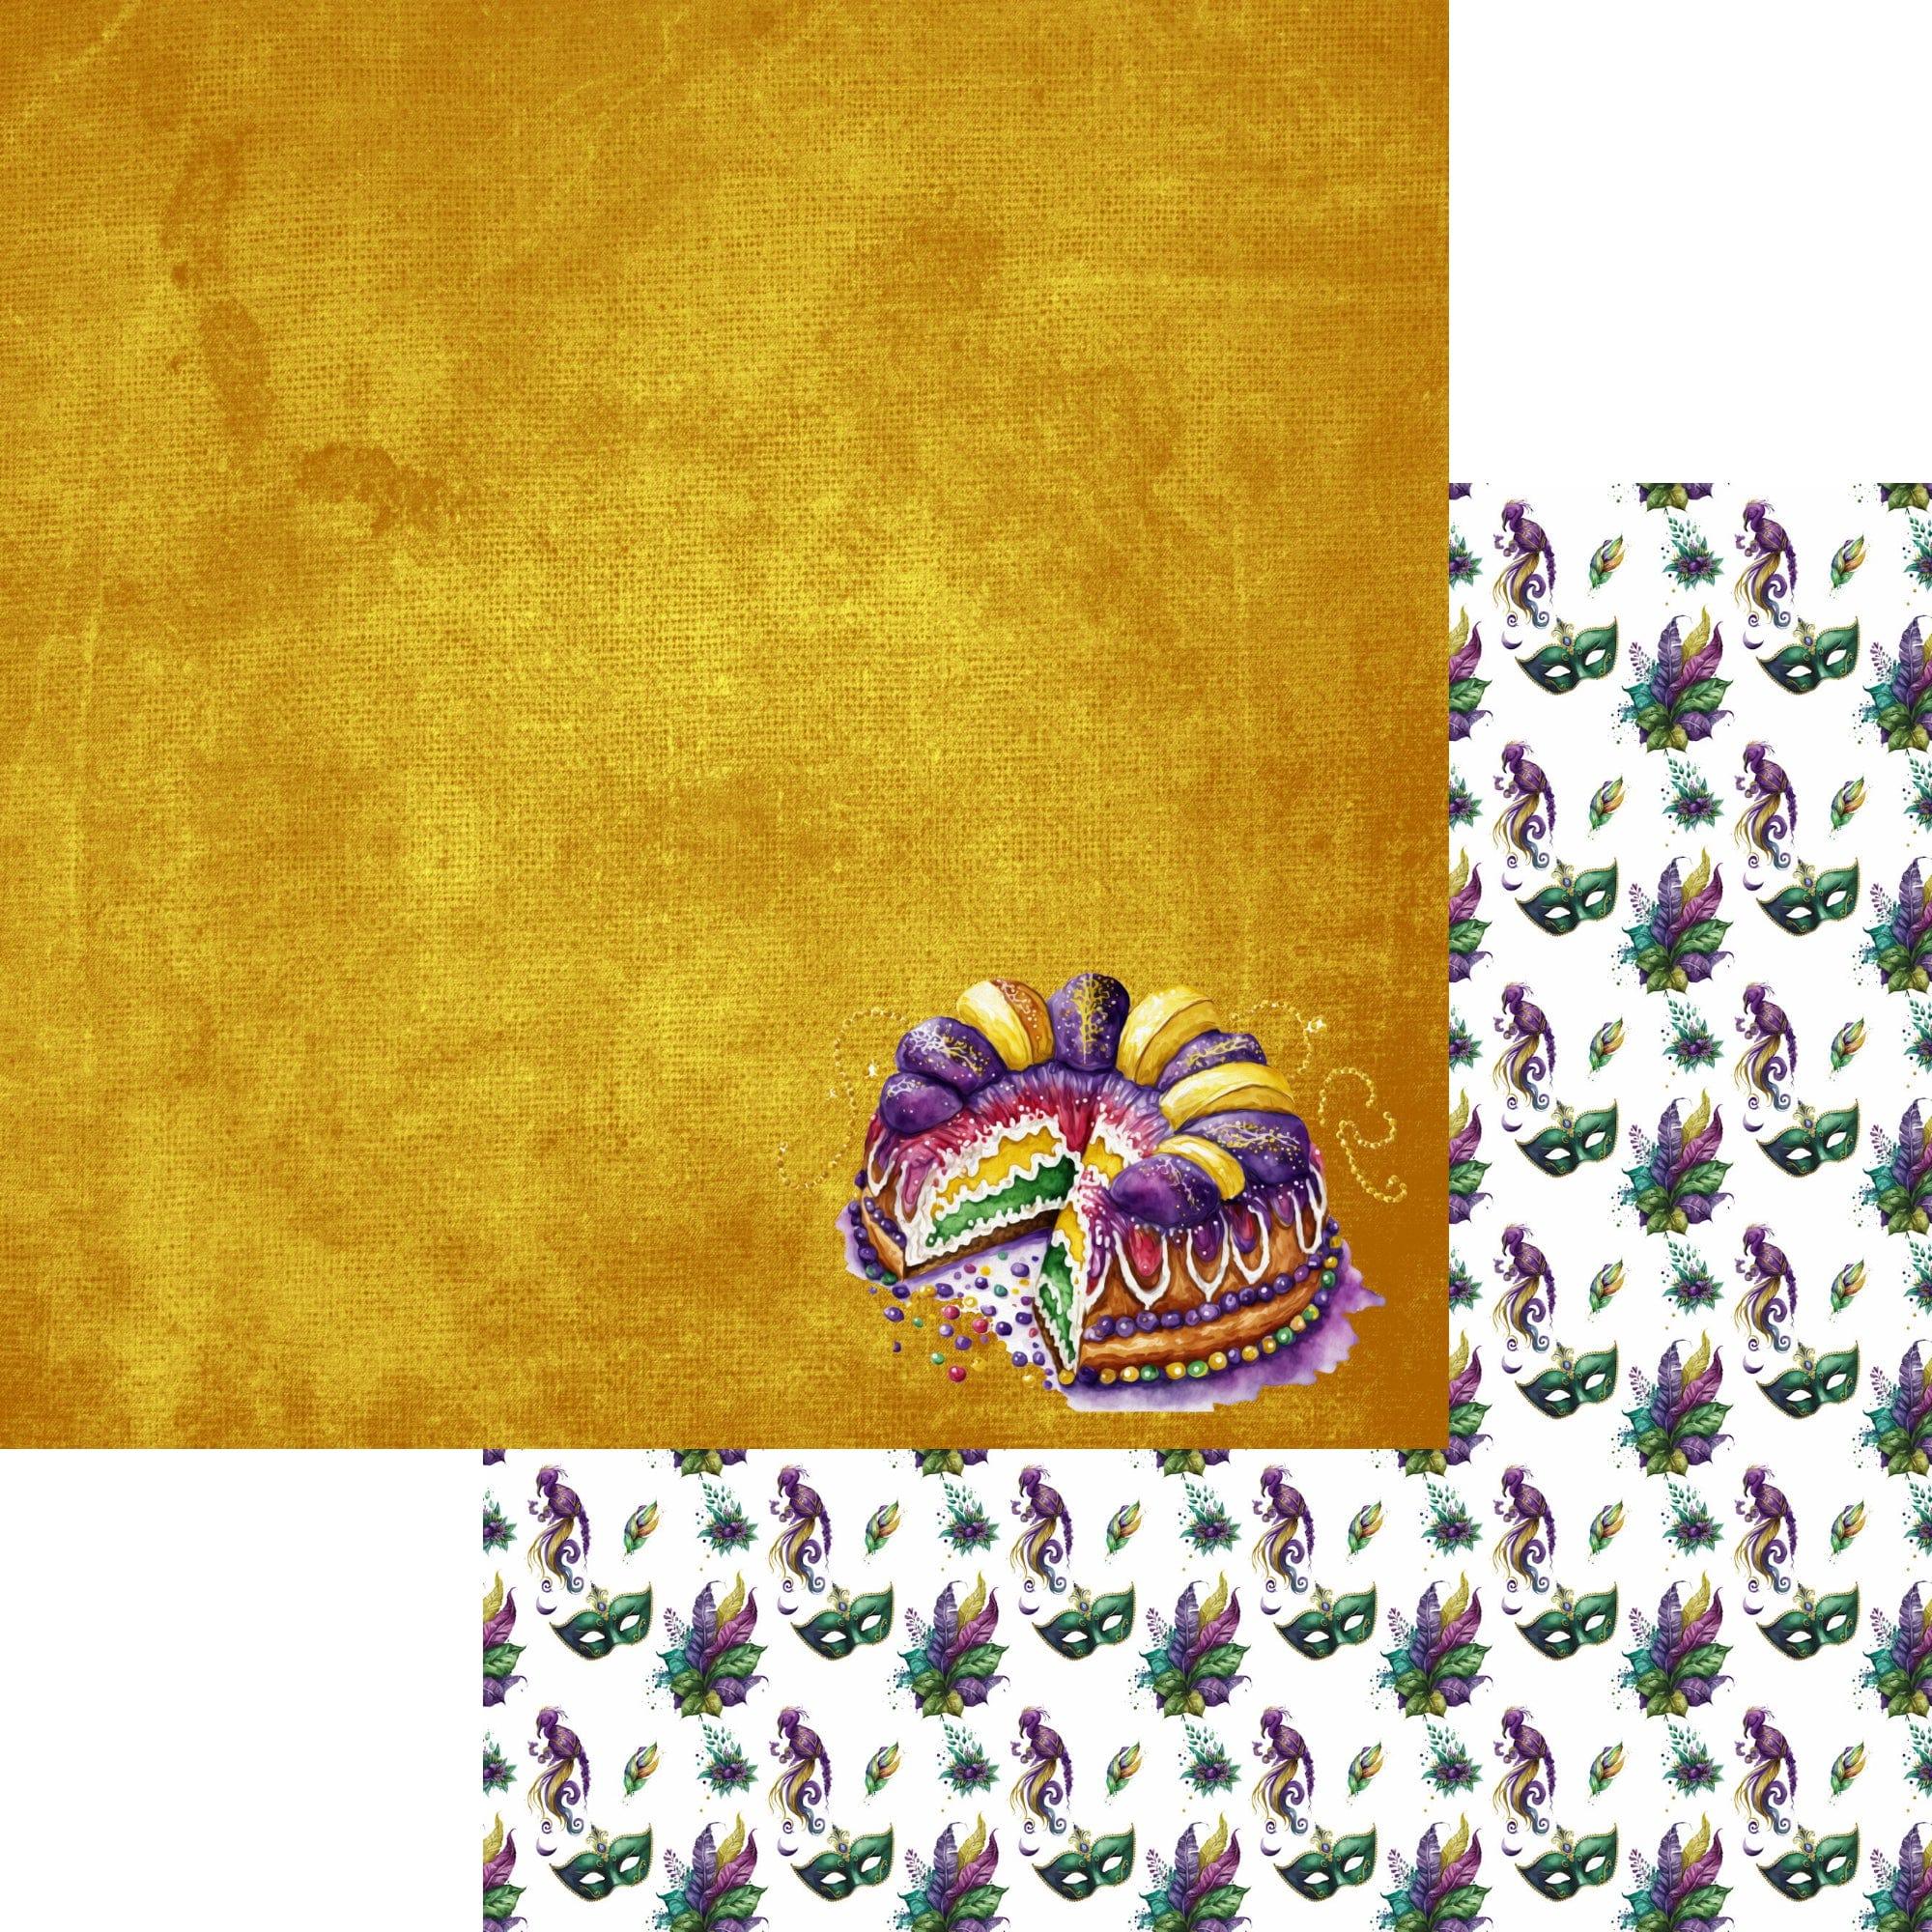 Mardi Gras Collection King Cake 12 x 12 Double-Sided Scrapbook Paper by SSC Designs